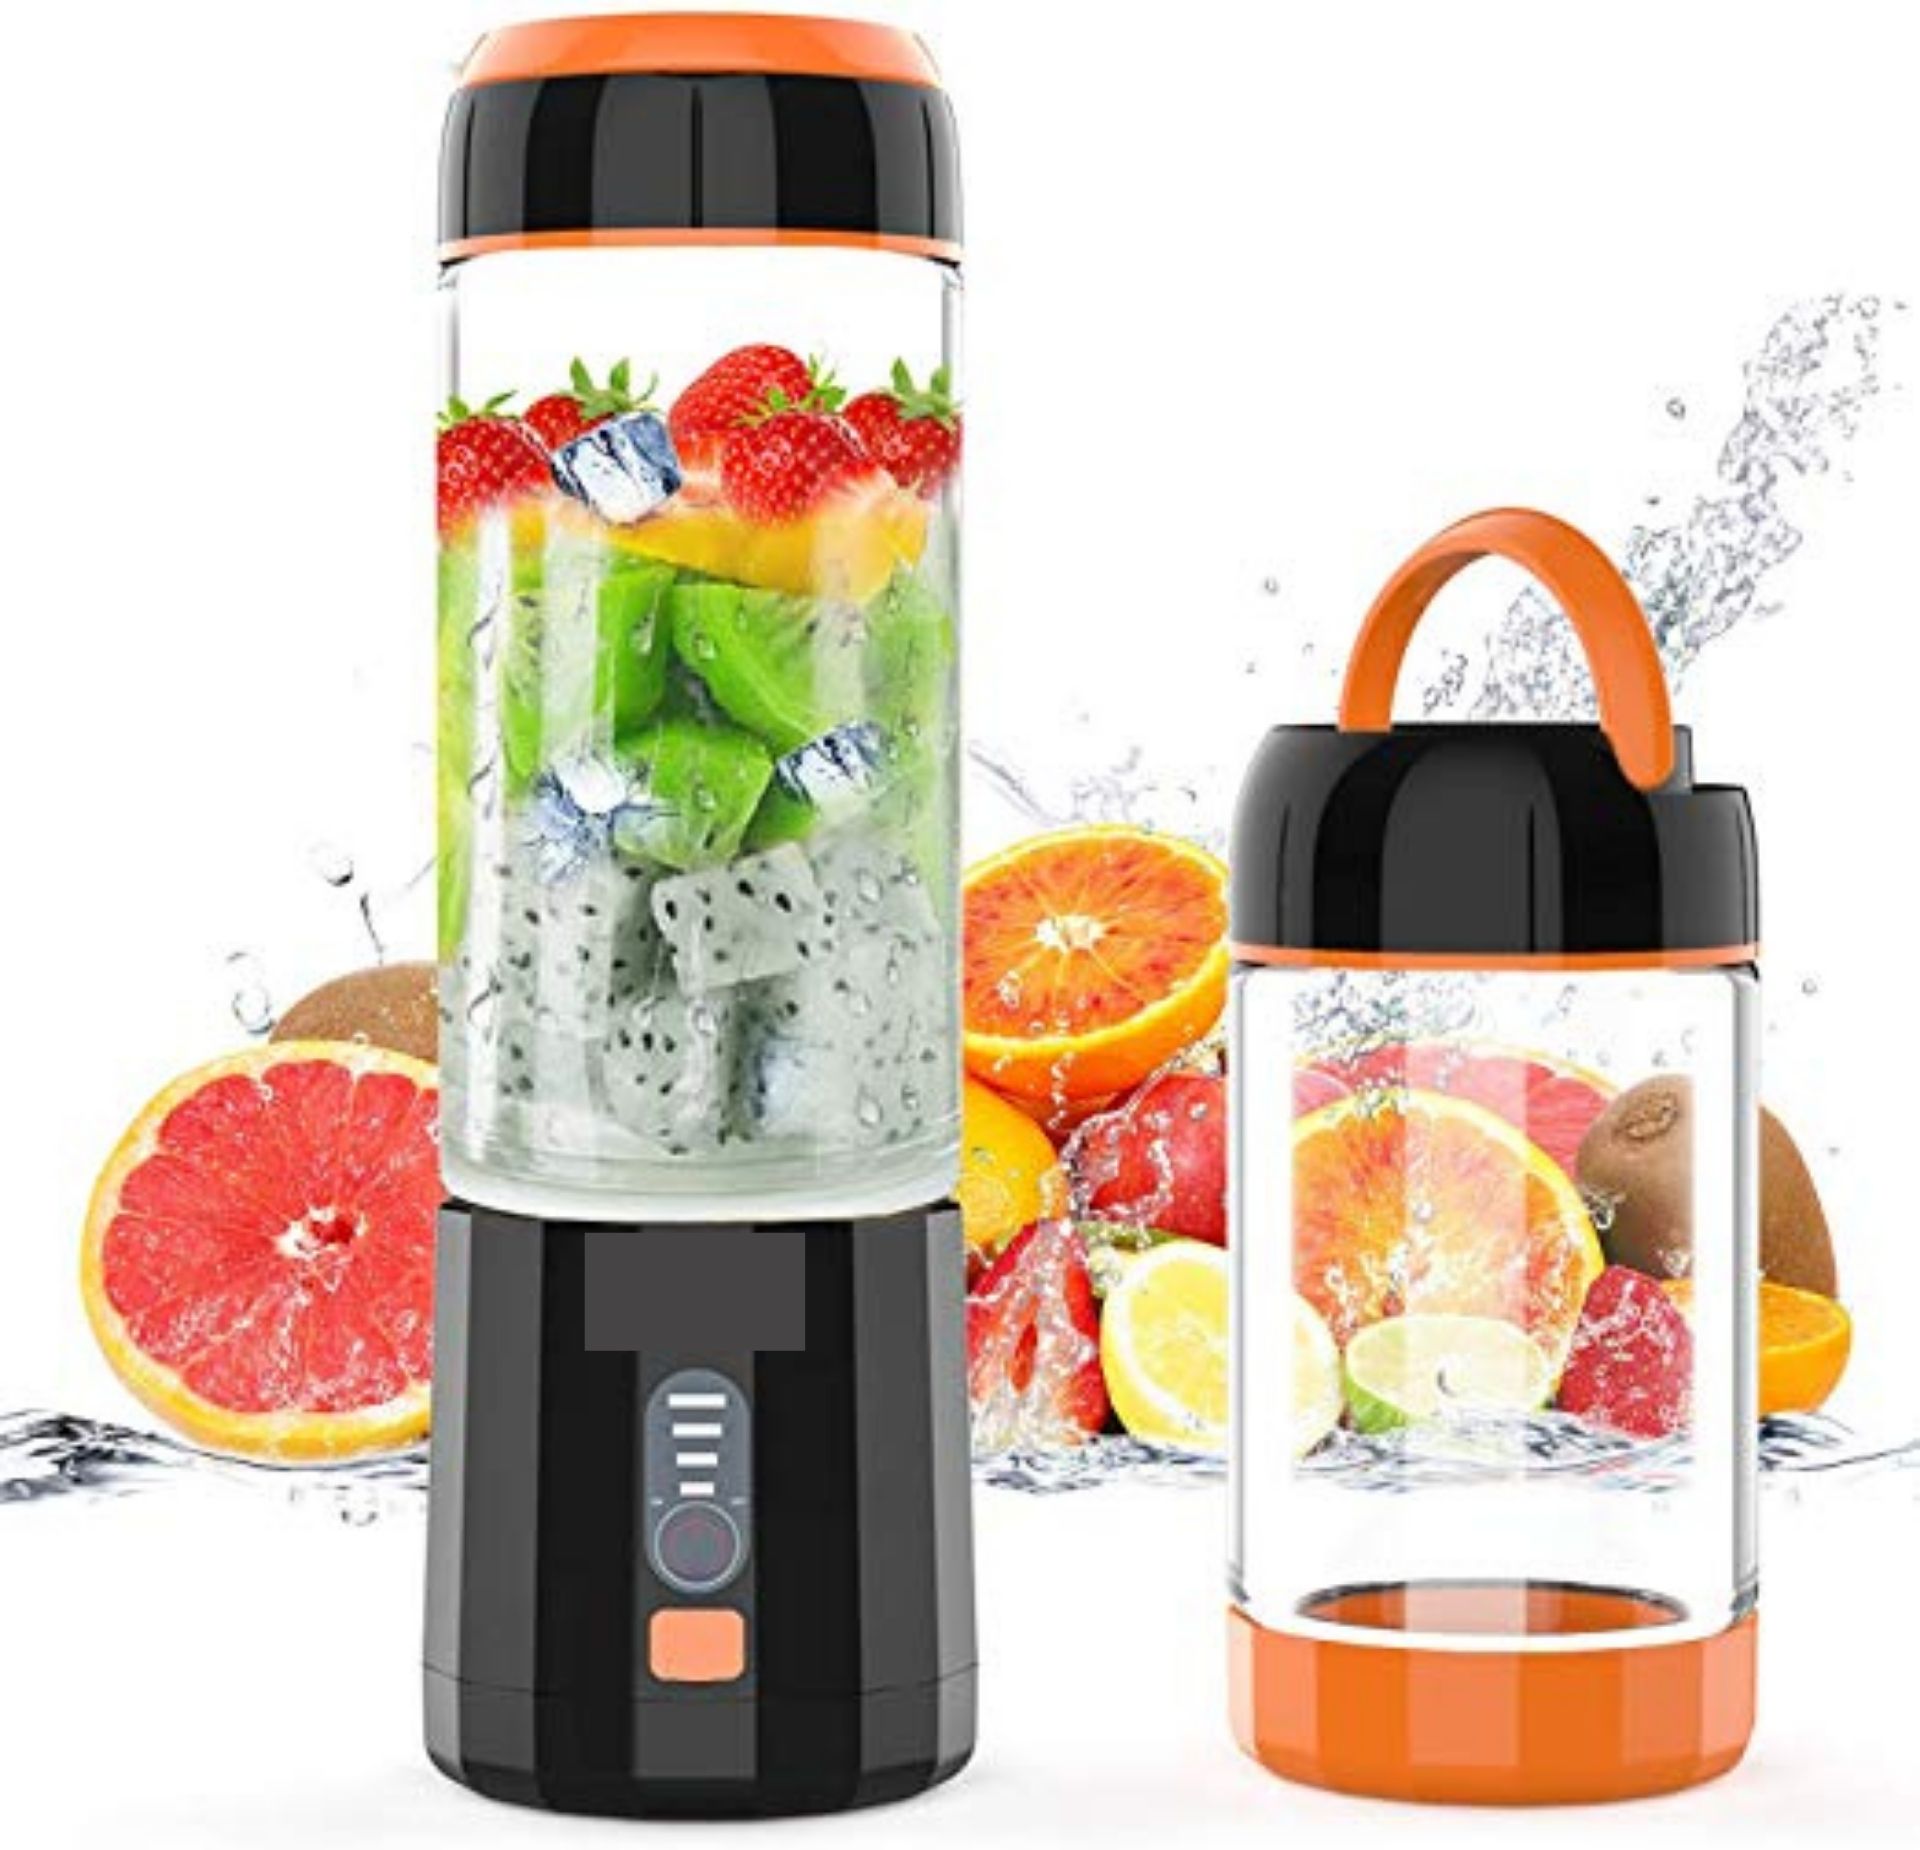 Lozayi Portable Blender Review (2021): Features + Pros/Cons